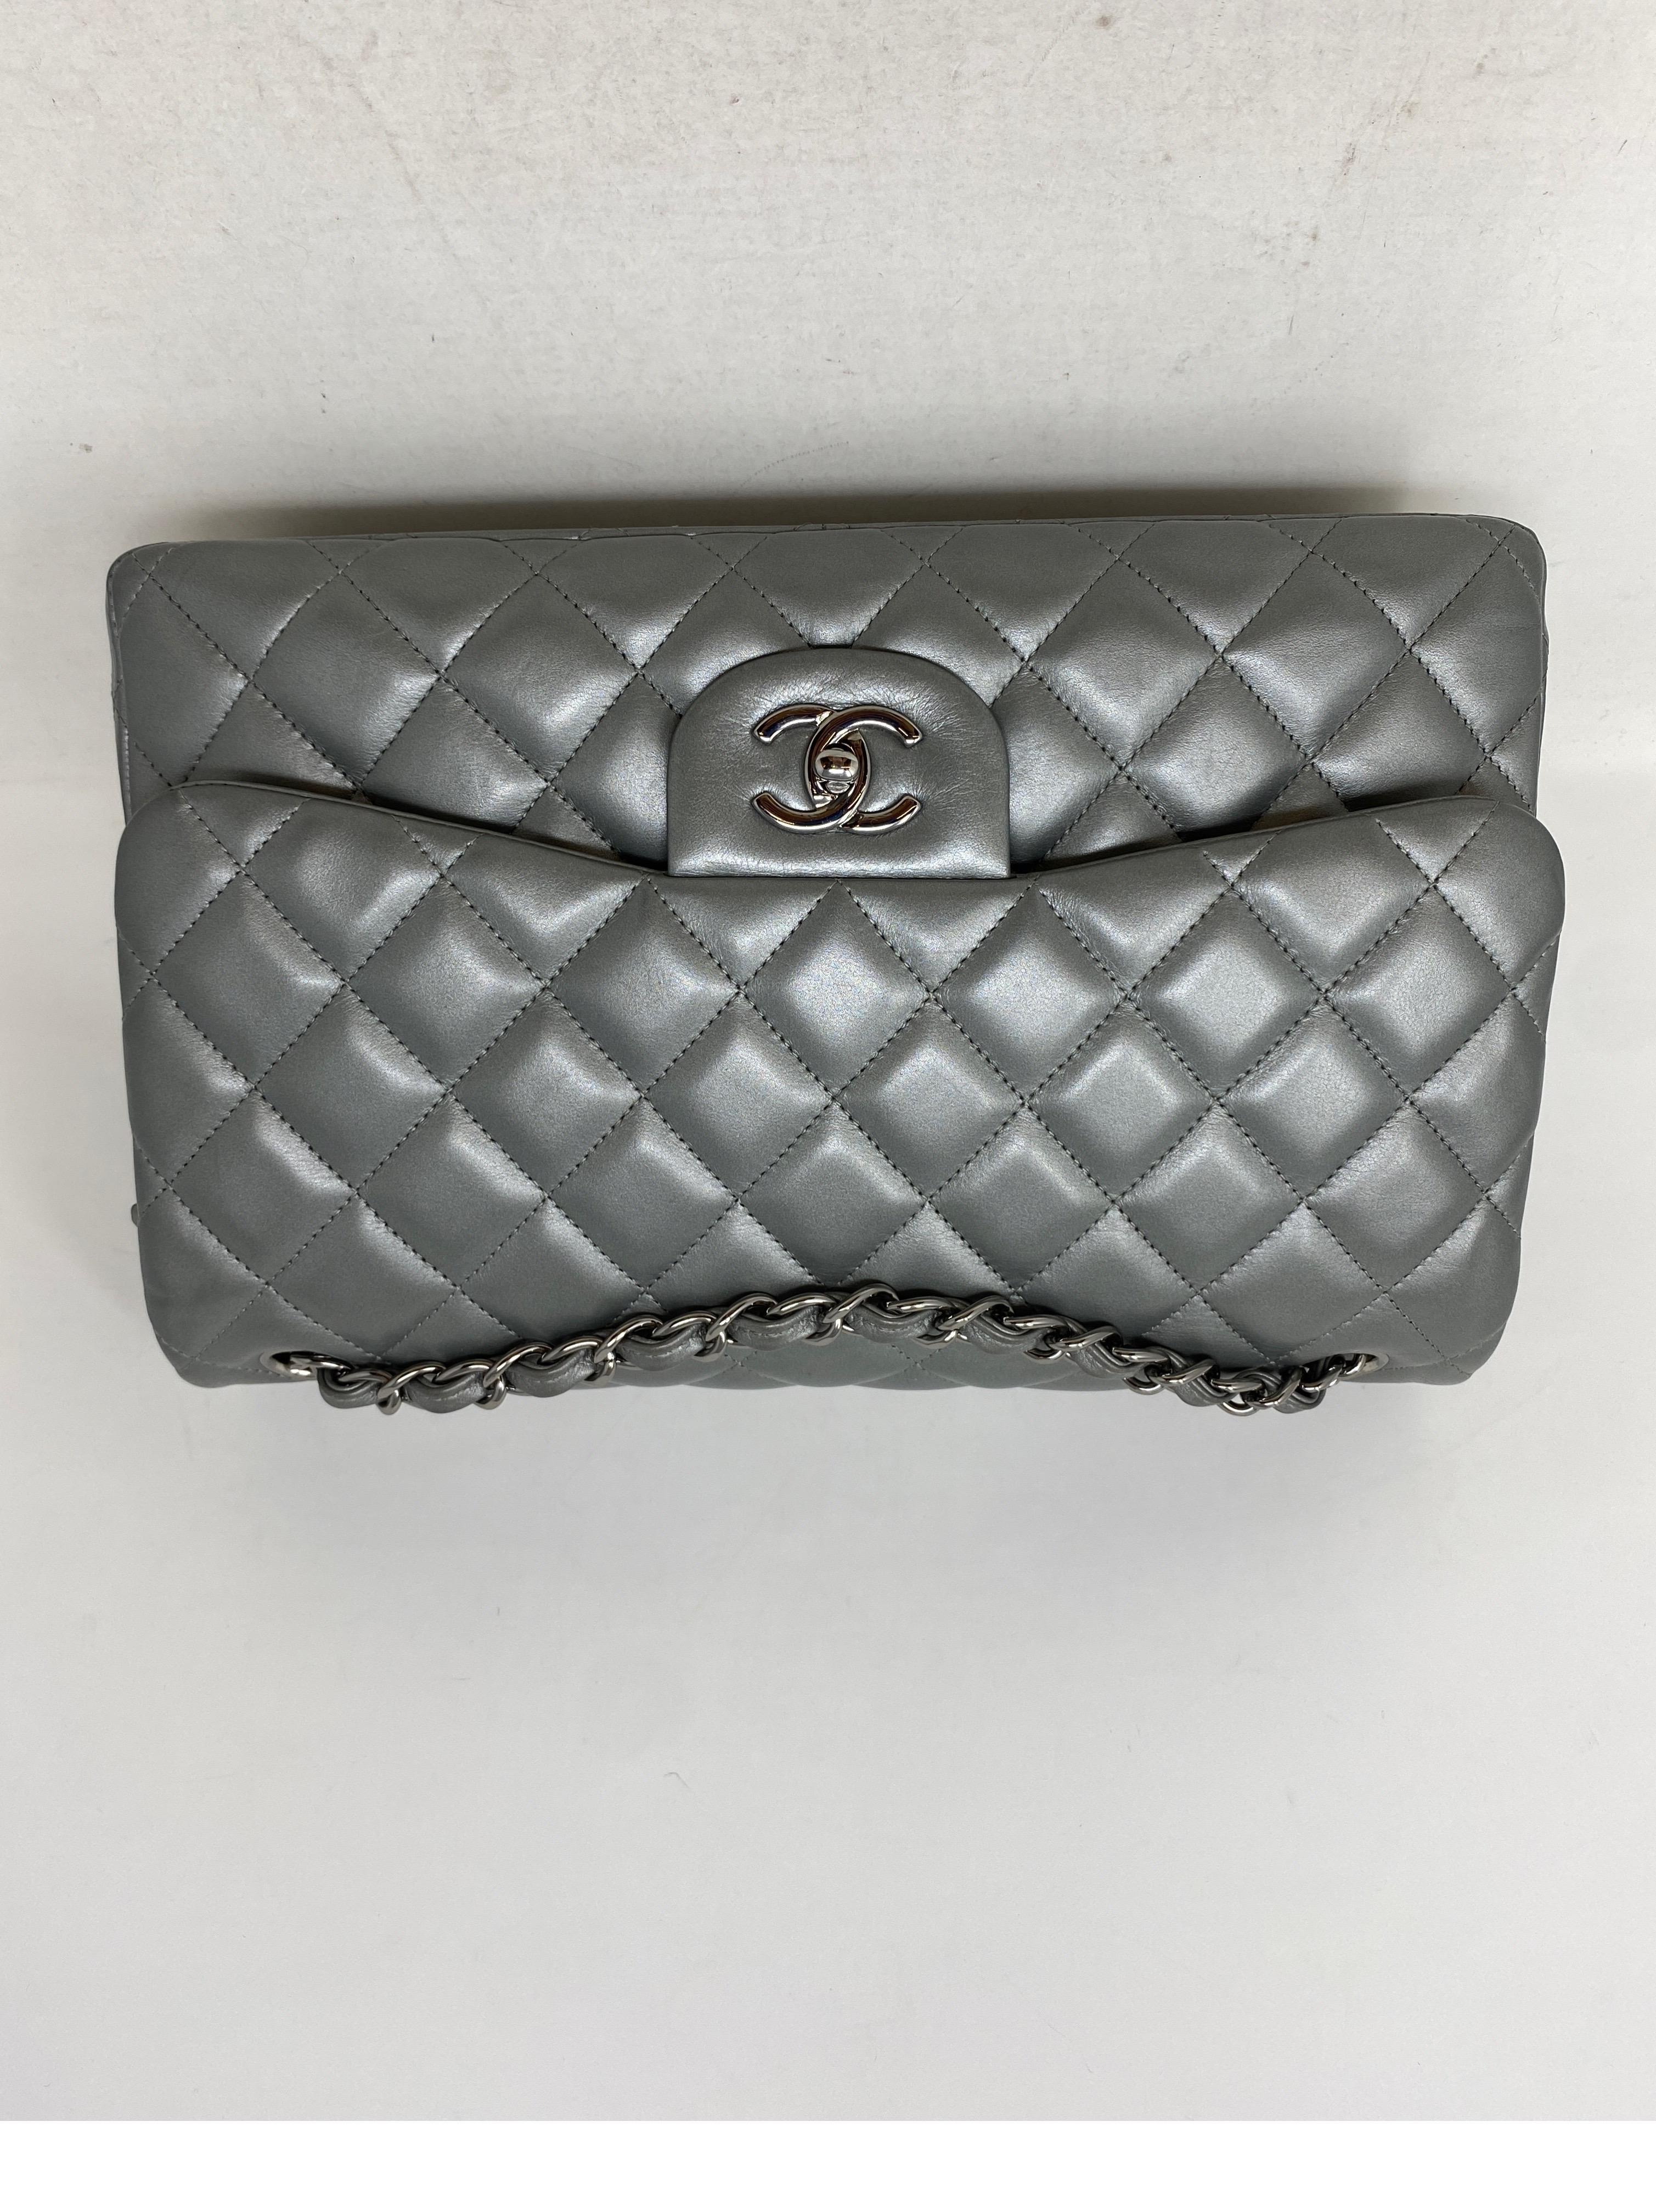 Chanel Silver Metallic Jumbo Double Flap Bag. Excellent condition. Unique silver lambskin leather bag. Silver hardware. Classic style bag with rare silver leather. Collector's piece. Includes dust cover and box. Guaranteed authentic. 